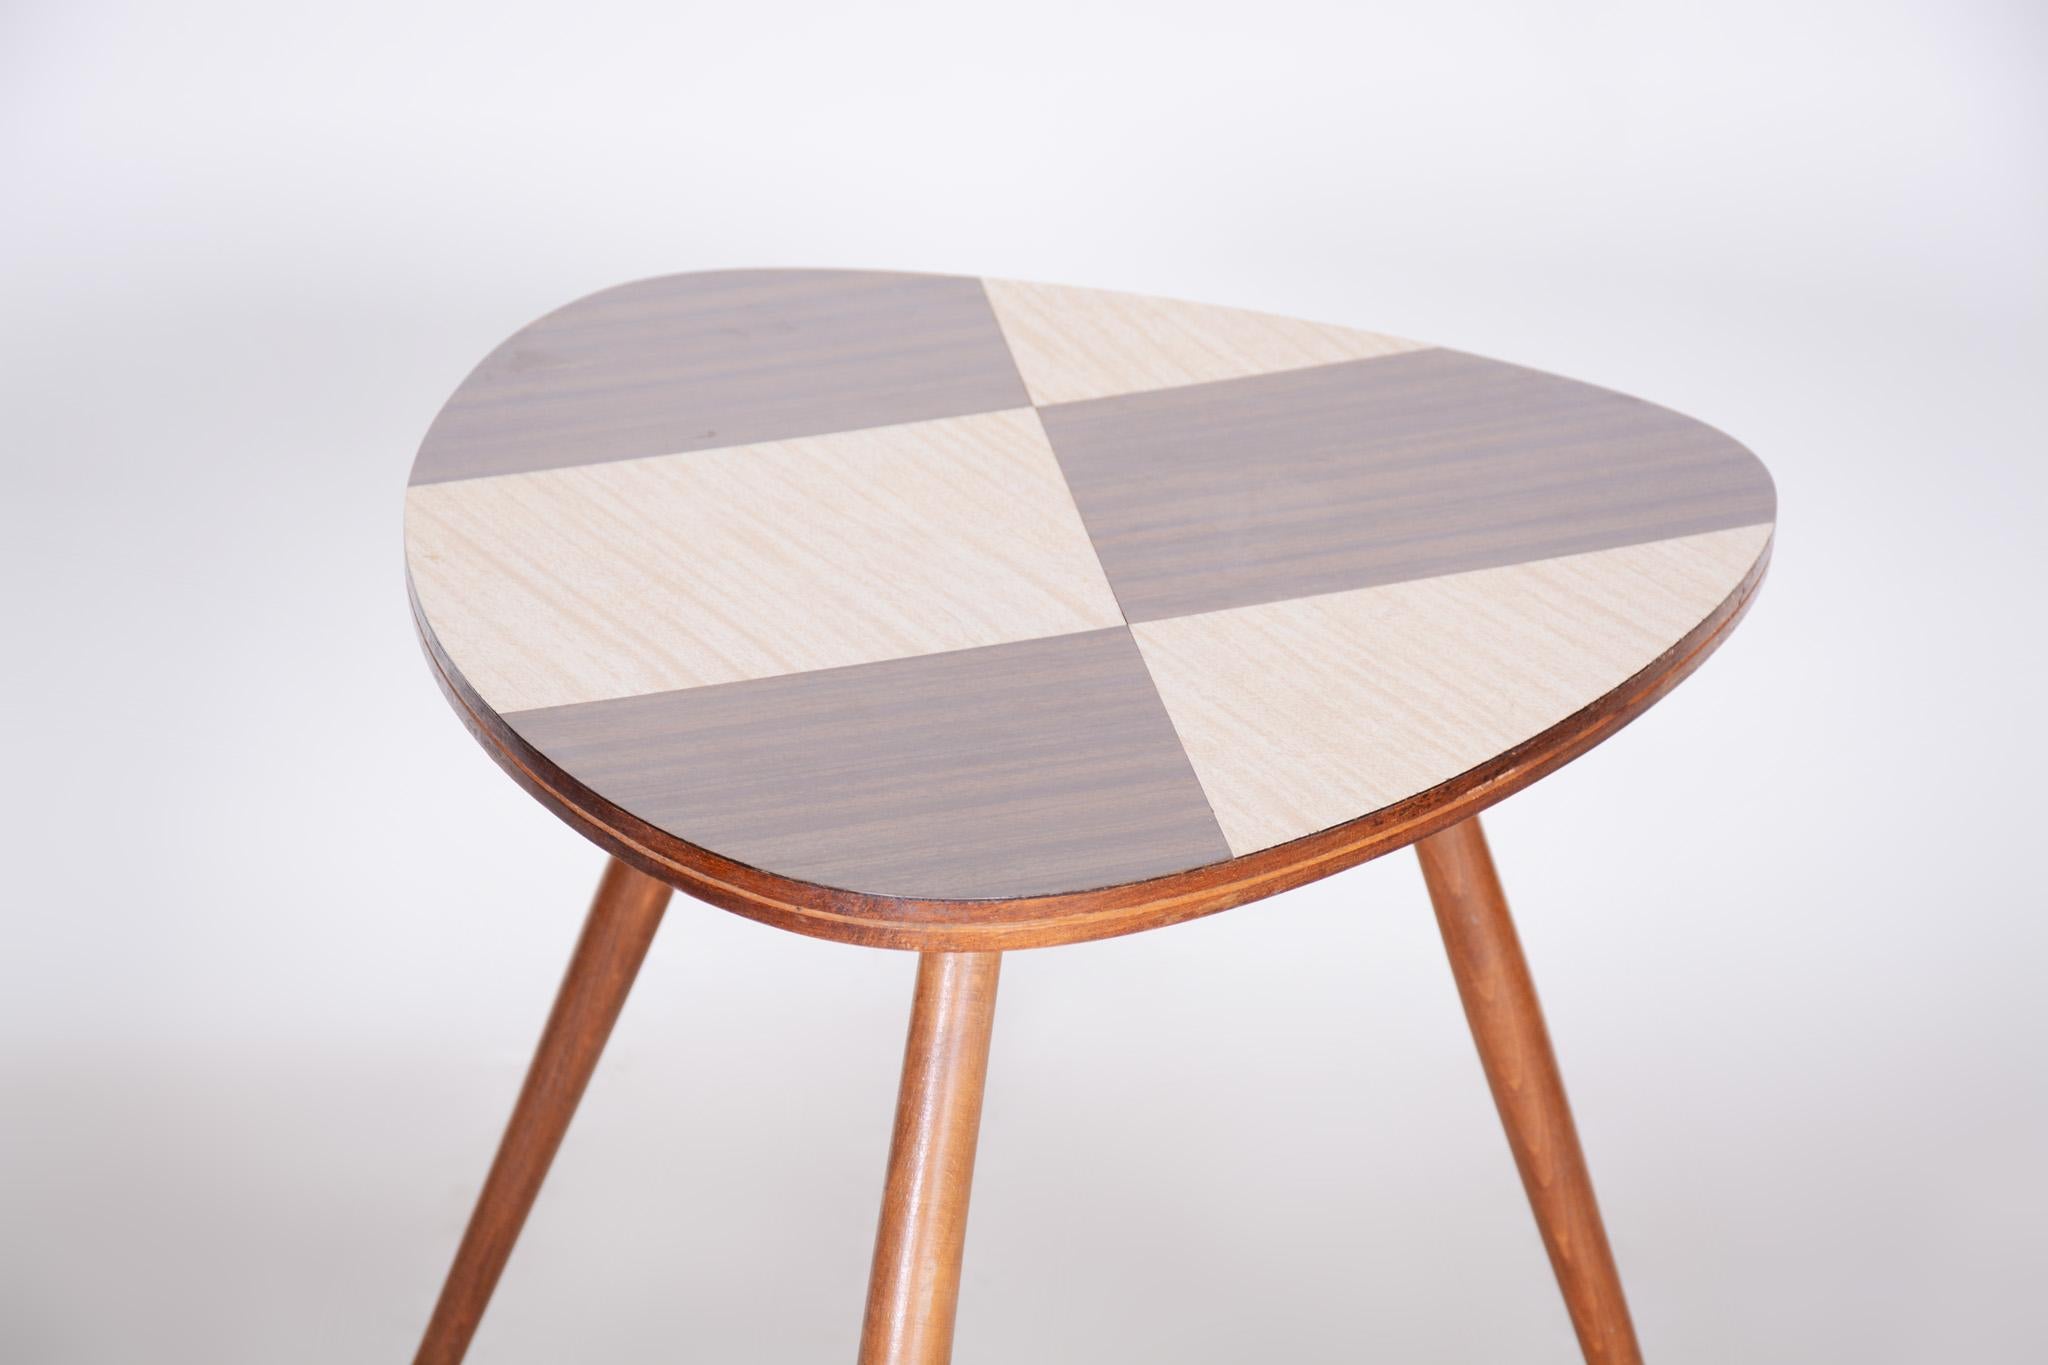 Formica Small Mid Century Table, Made in Czechia, 1950s, Original Condition. Beech For Sale